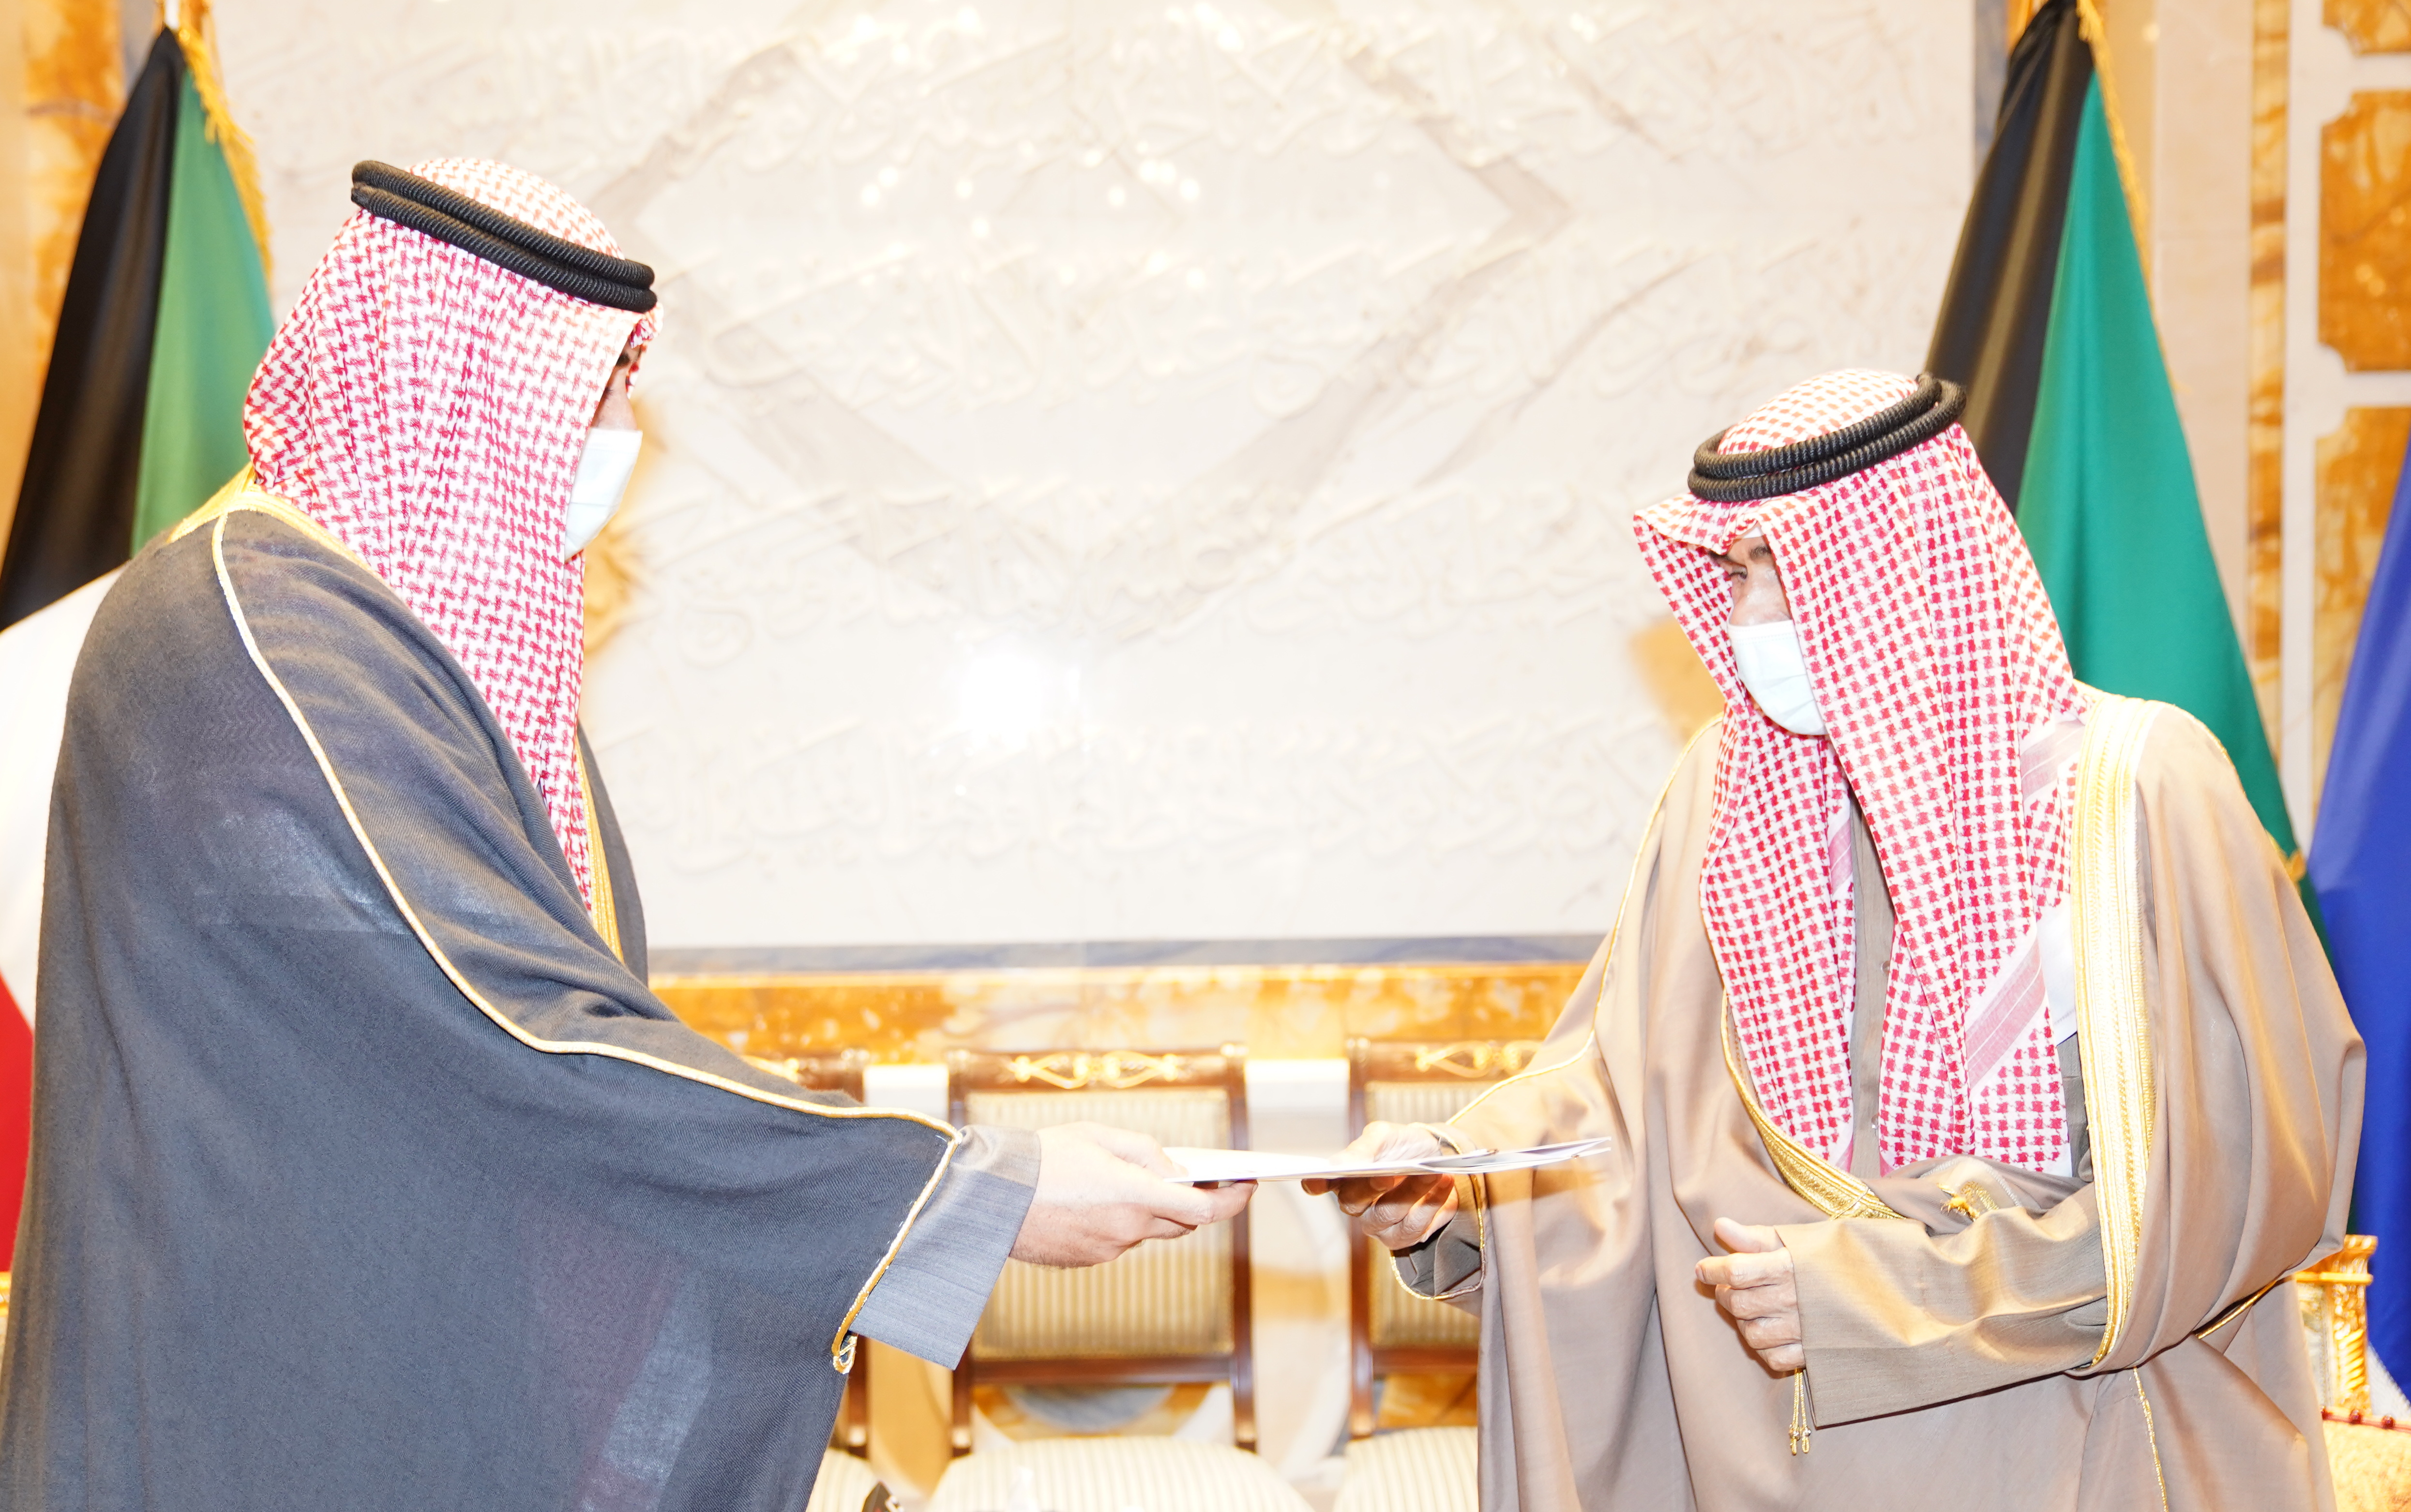 HH the Amir received HH the Prime Minister